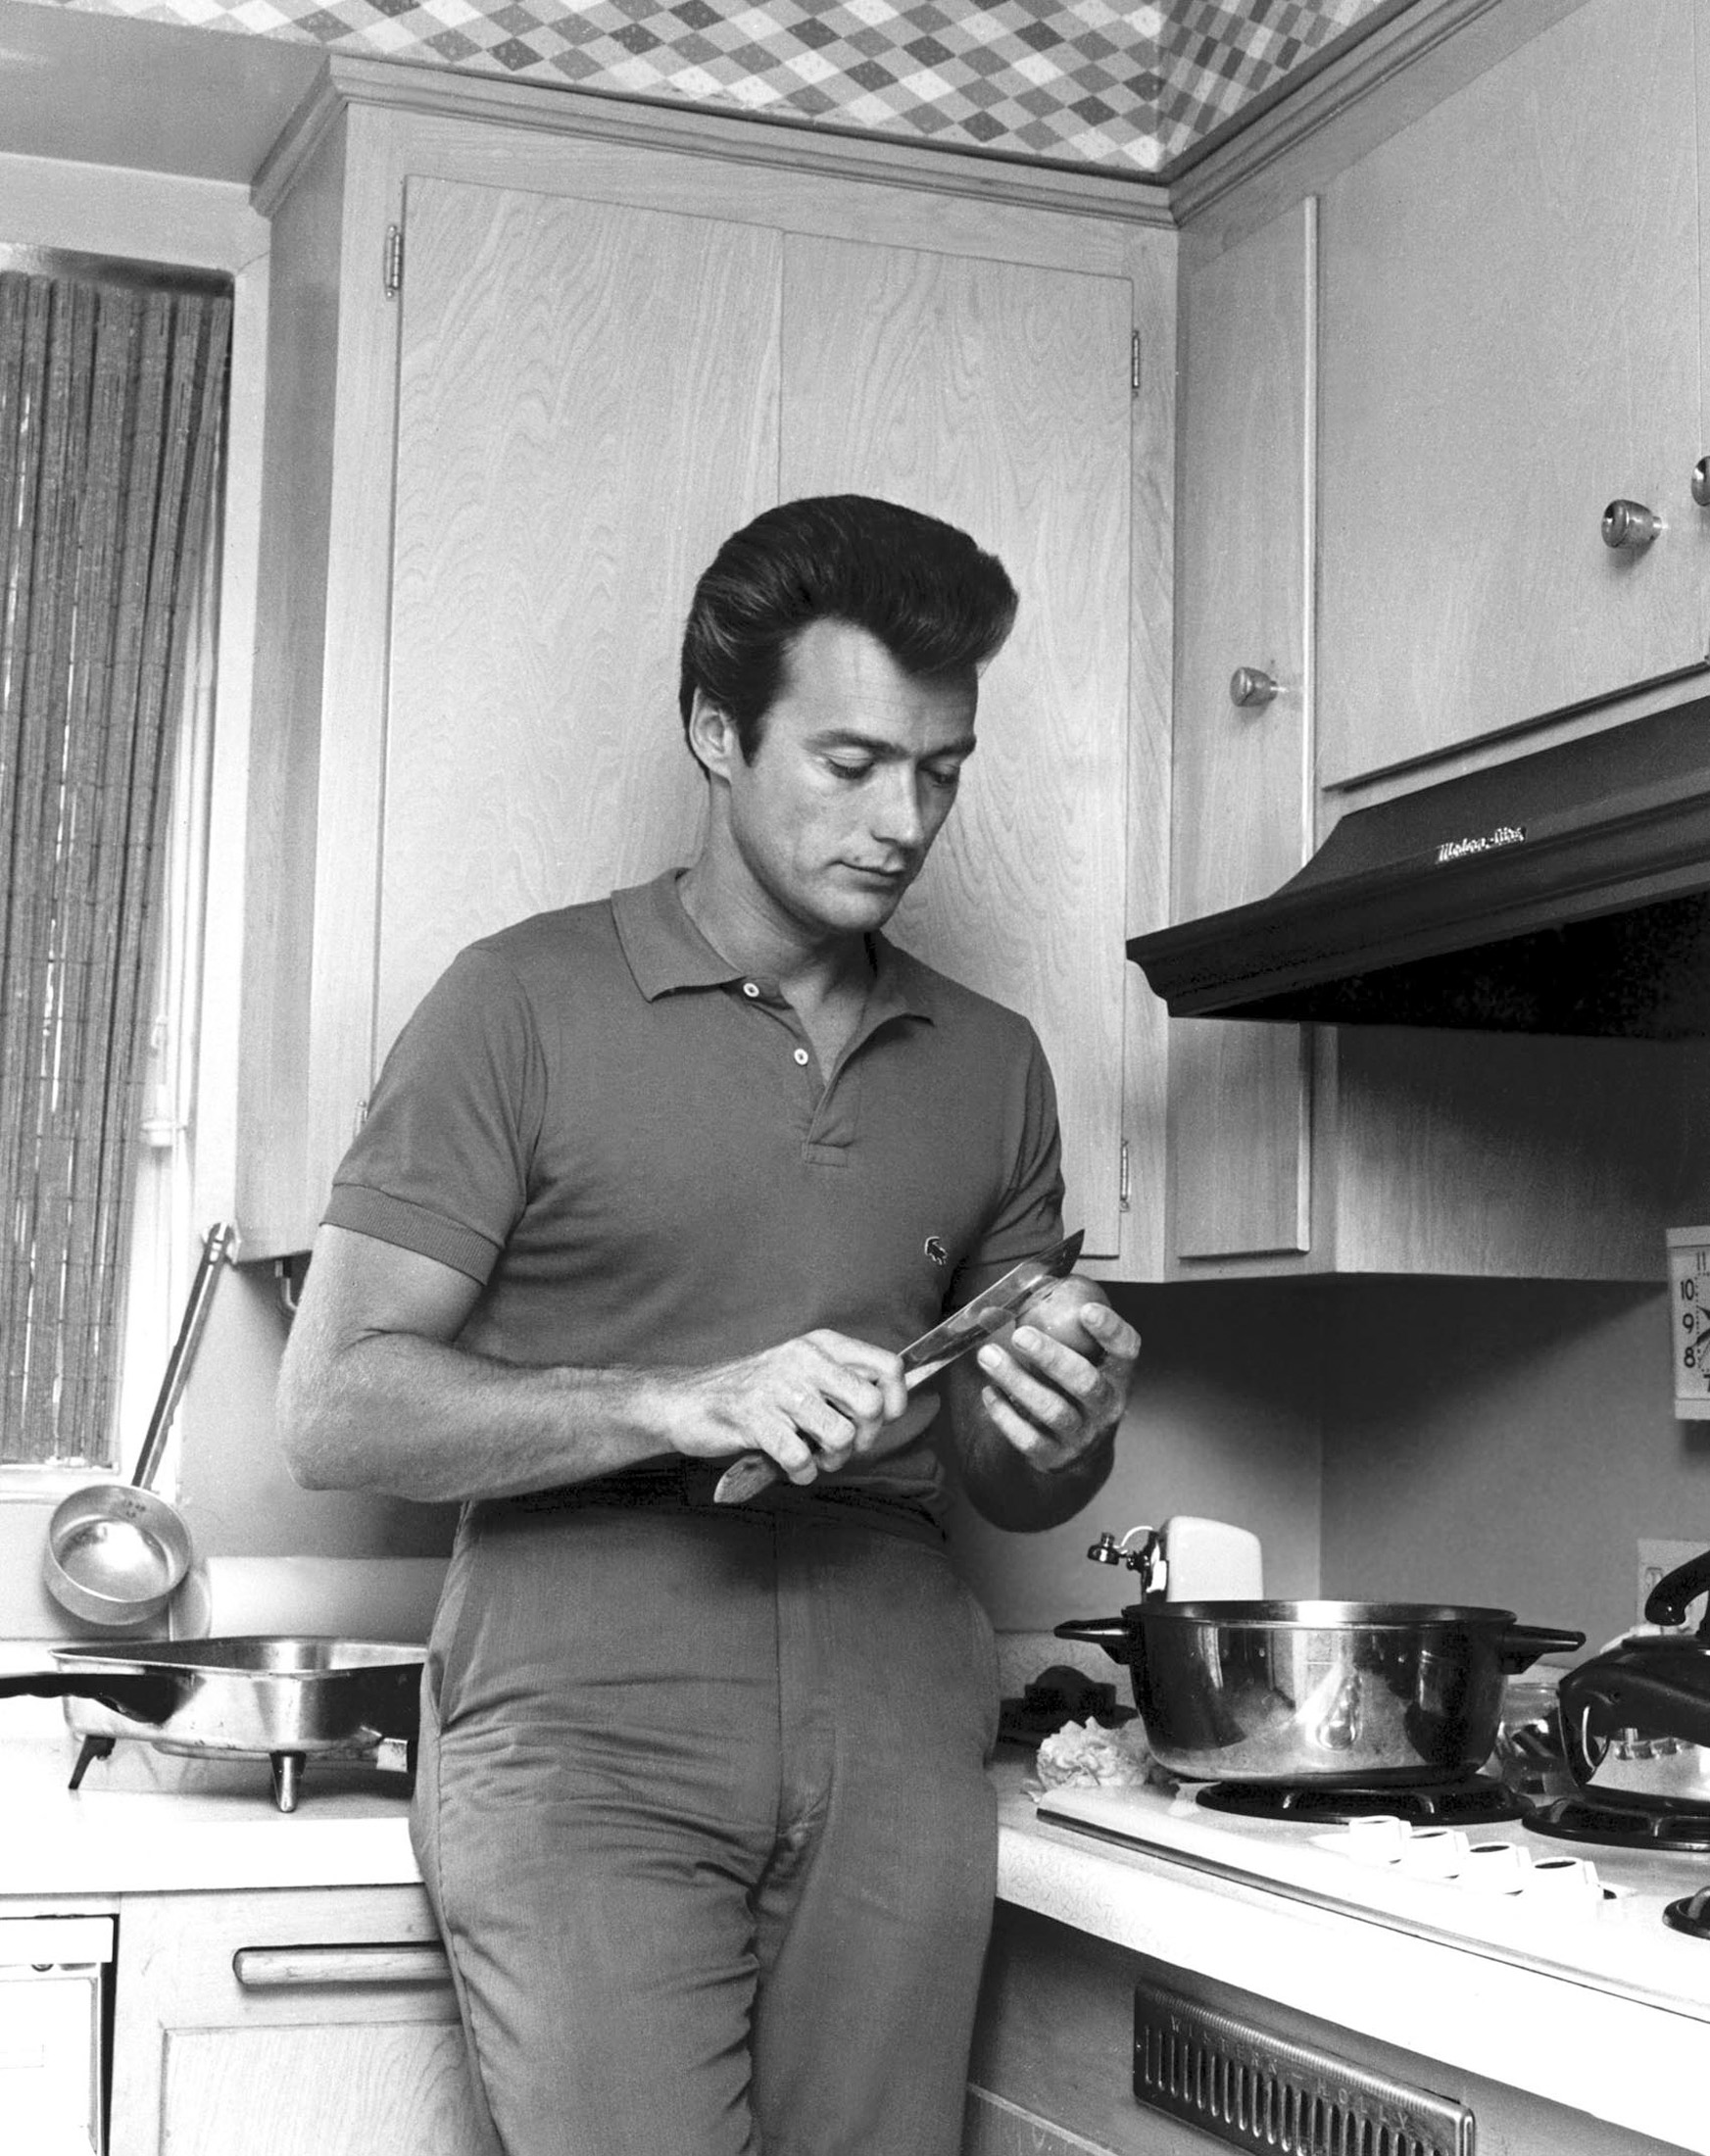 CLINT EASTWOOD at home in California prepped-out in an old Izod ...